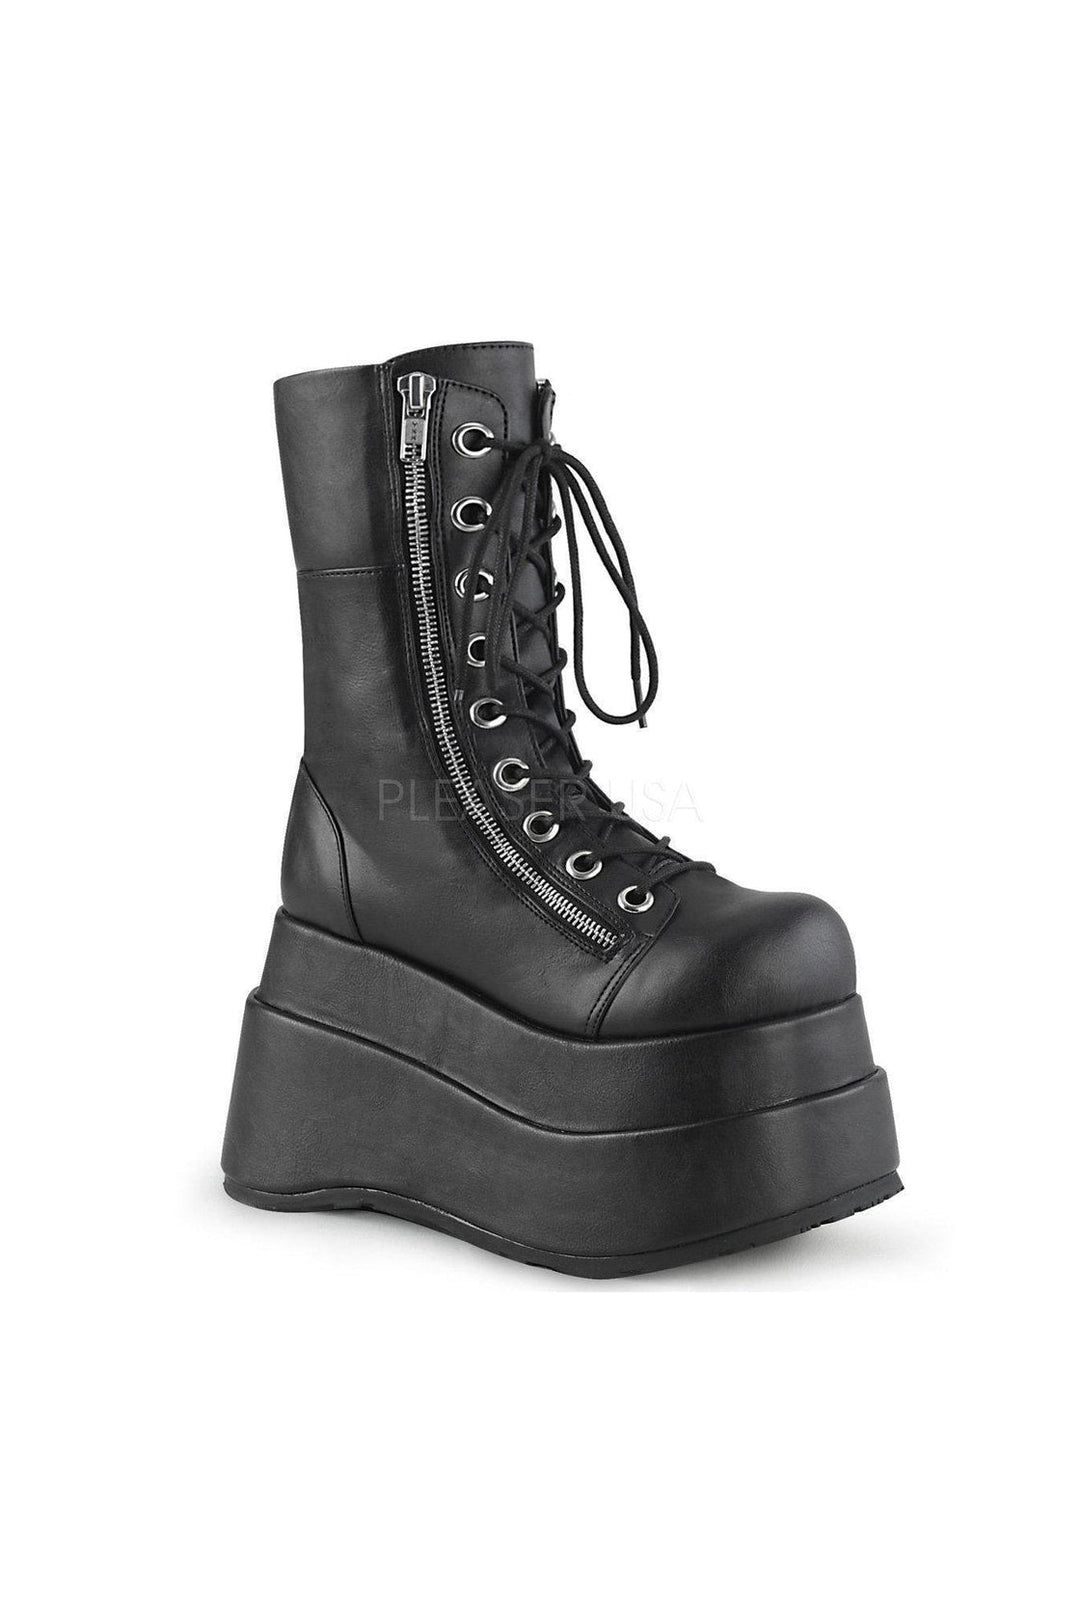 BEAR-265 Demonia Ankle Boot | Black Faux Leather-Demonia-SEXYSHOES.COM